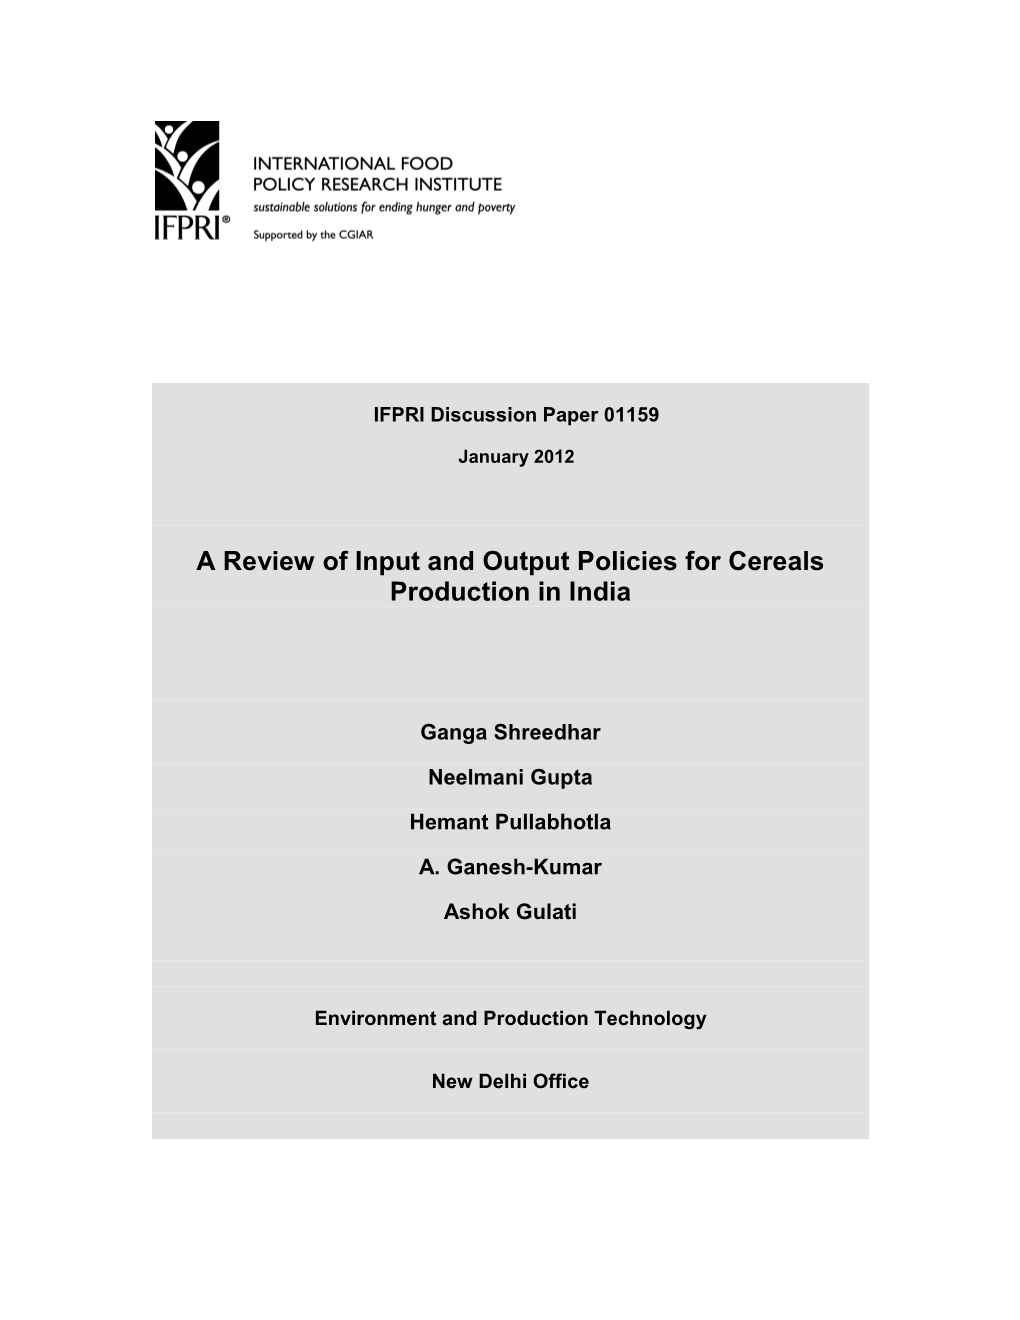 A Review of Input and Output Policies for Cereals Production in India